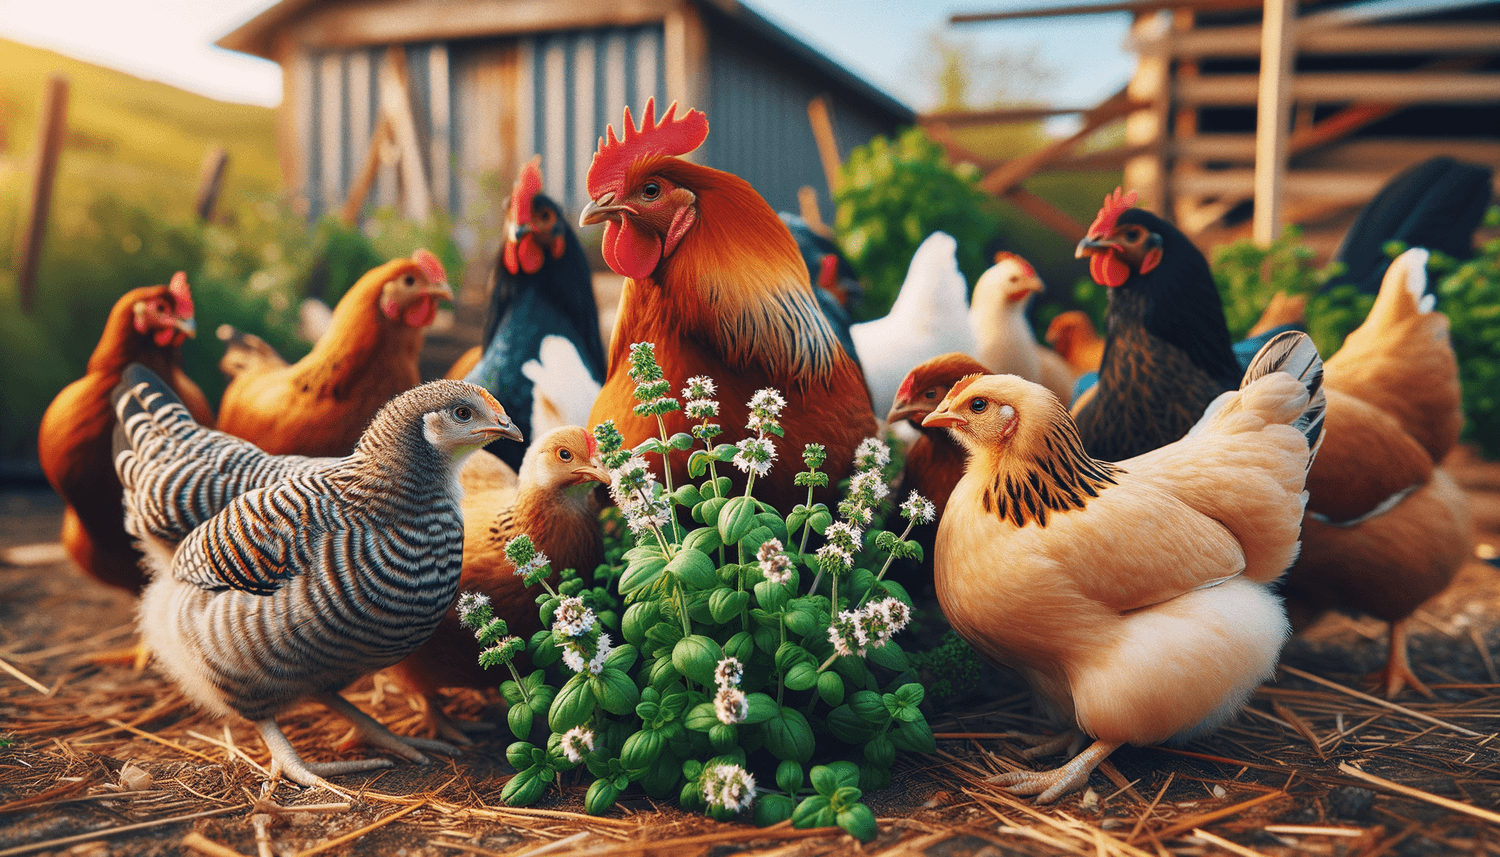 Can Chickens Eat Oregano?